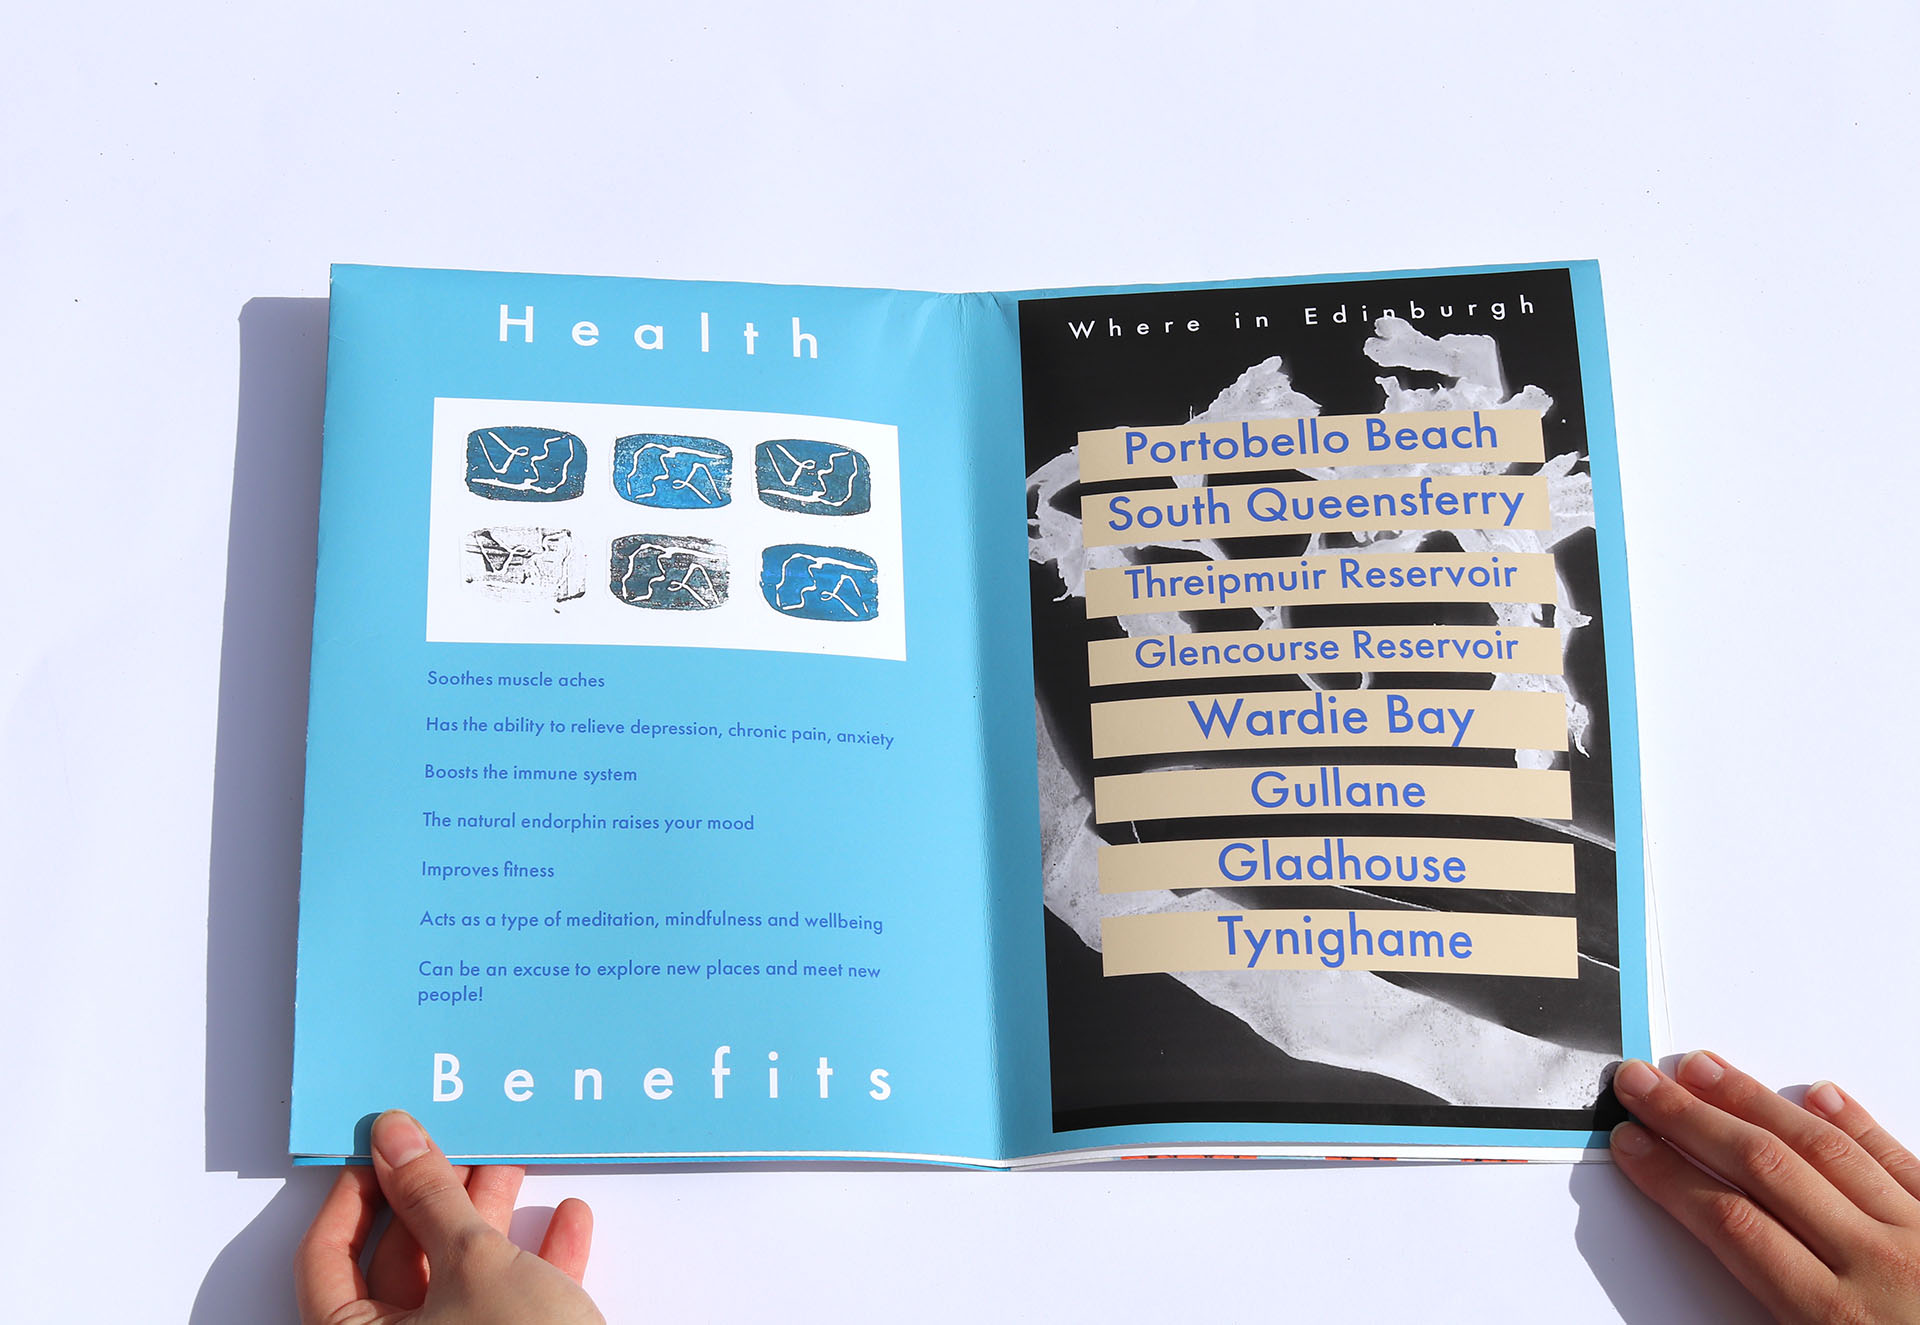 First double page of the fold out poster zine. Combined text and imagery relays the health benefits and potential swimming locations around Edinburgh. 